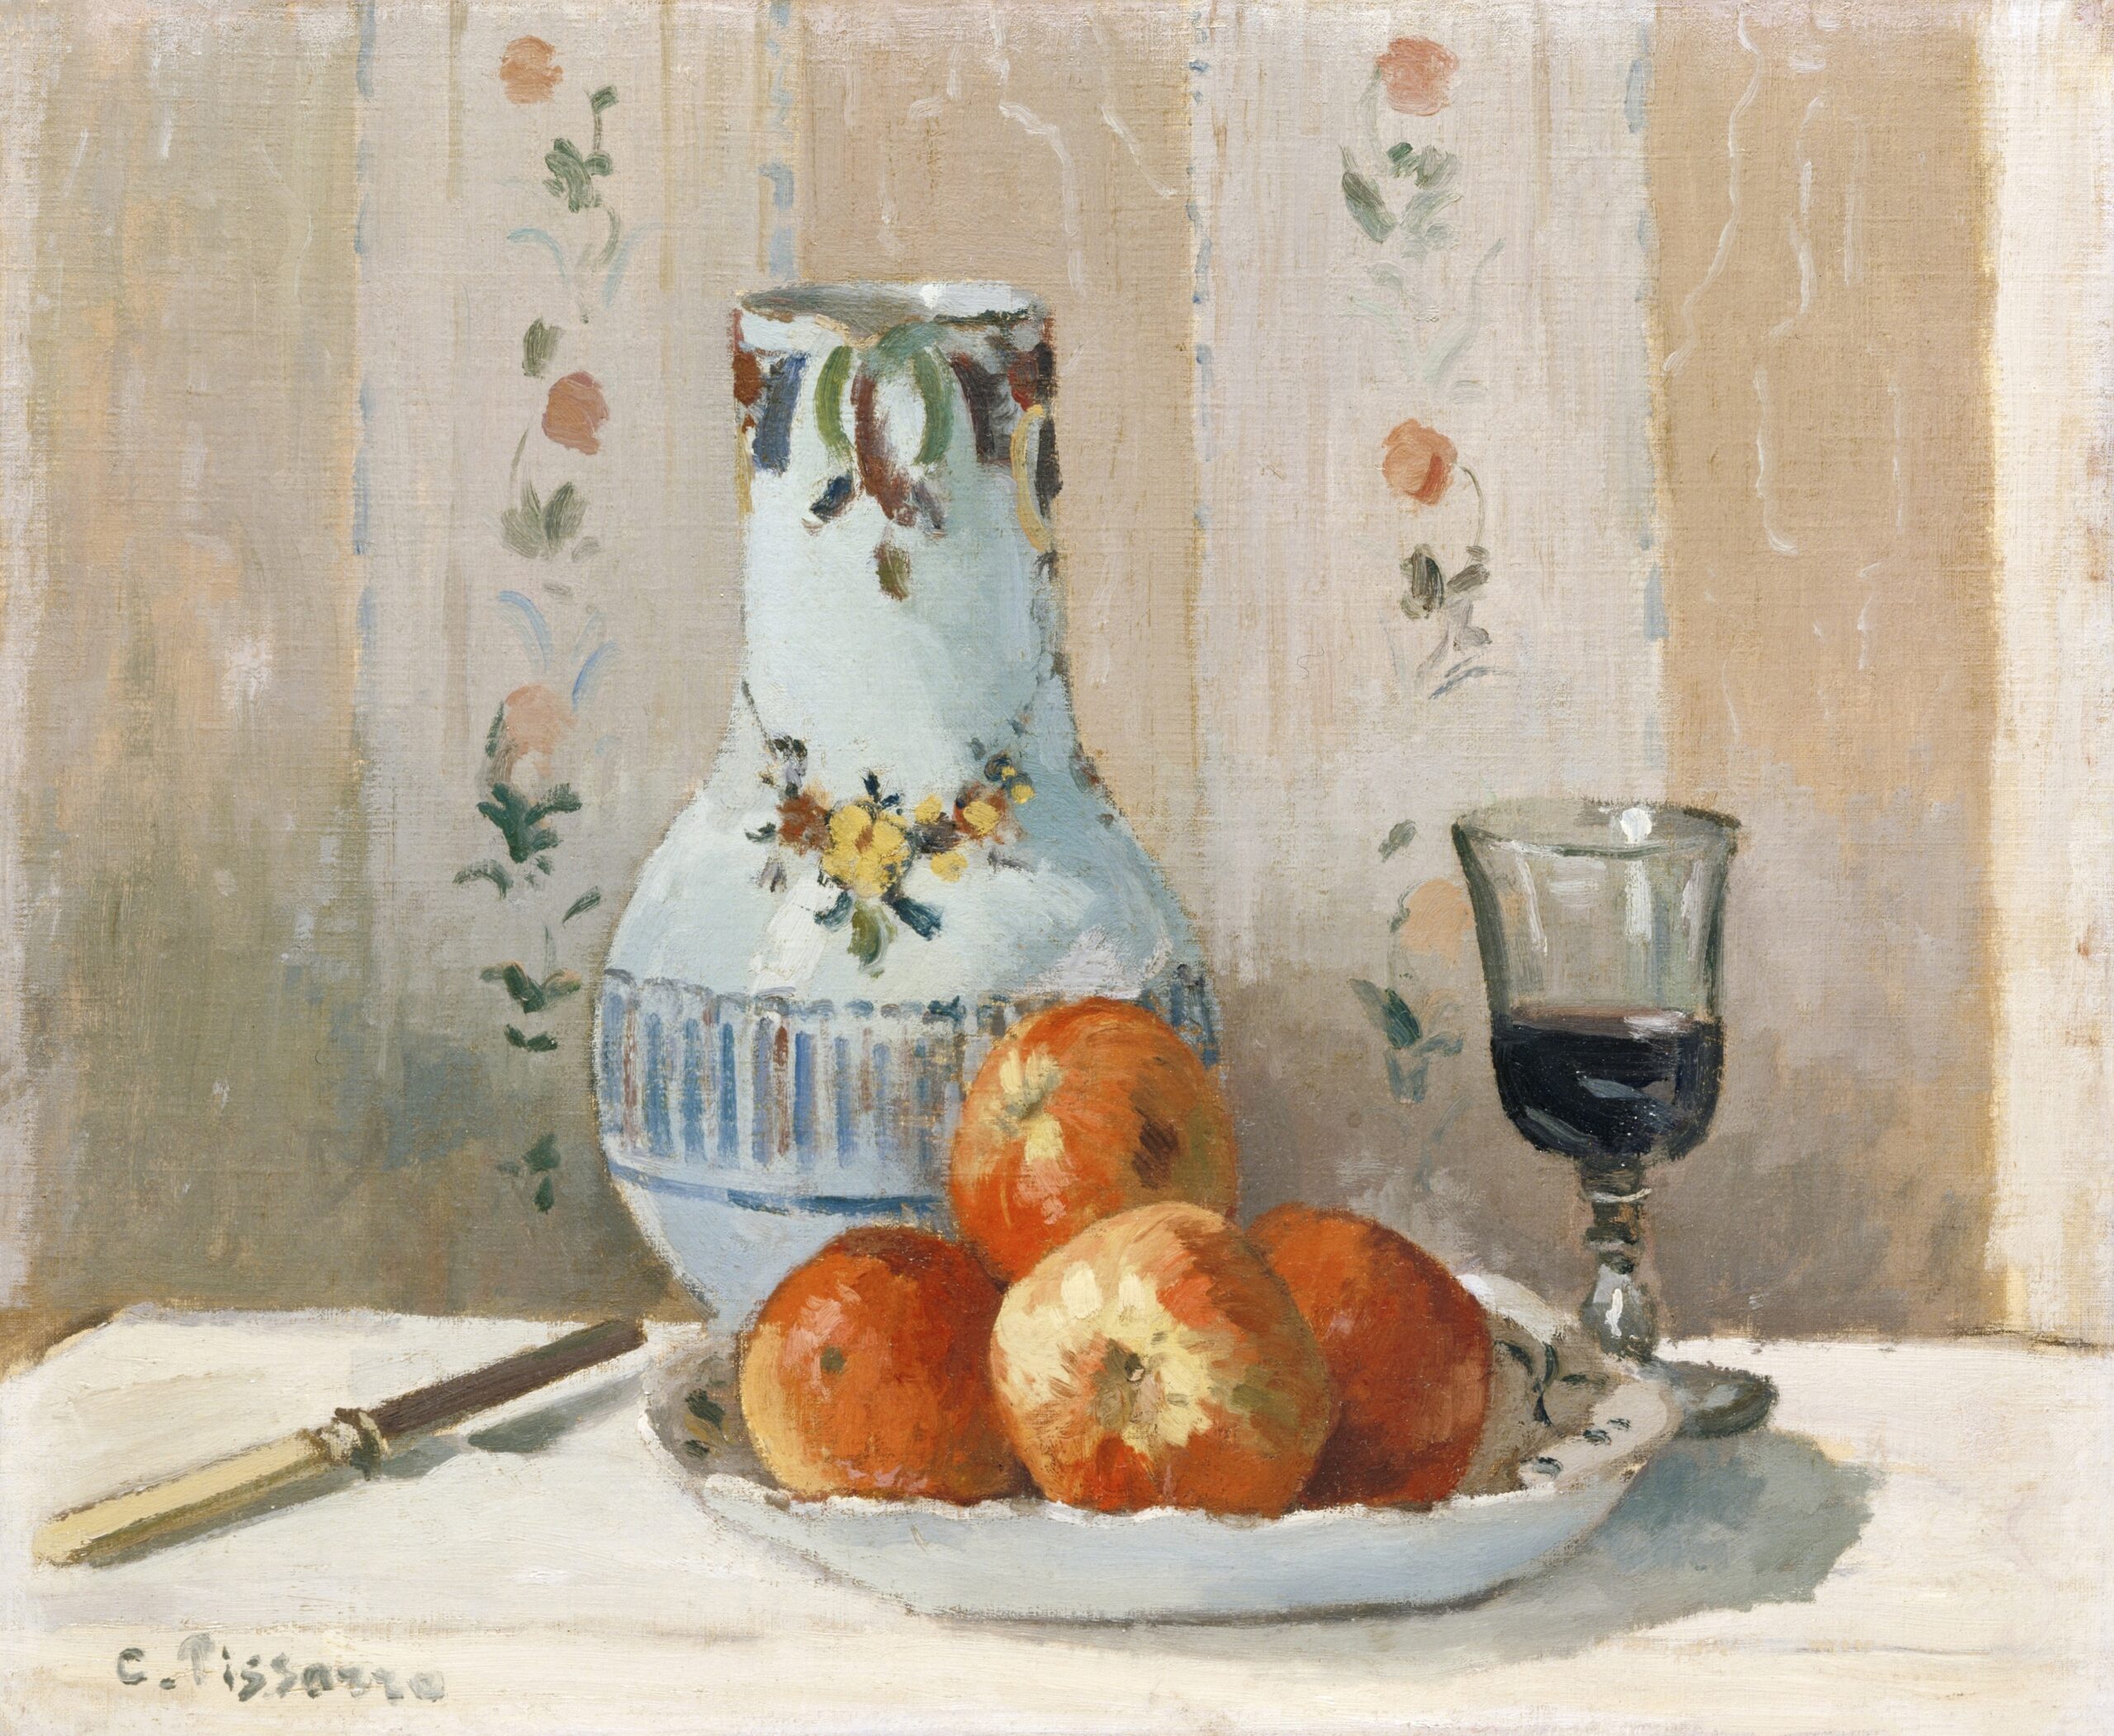 Still Life with Apples and Pitcher (1872) by Camille Pissarro